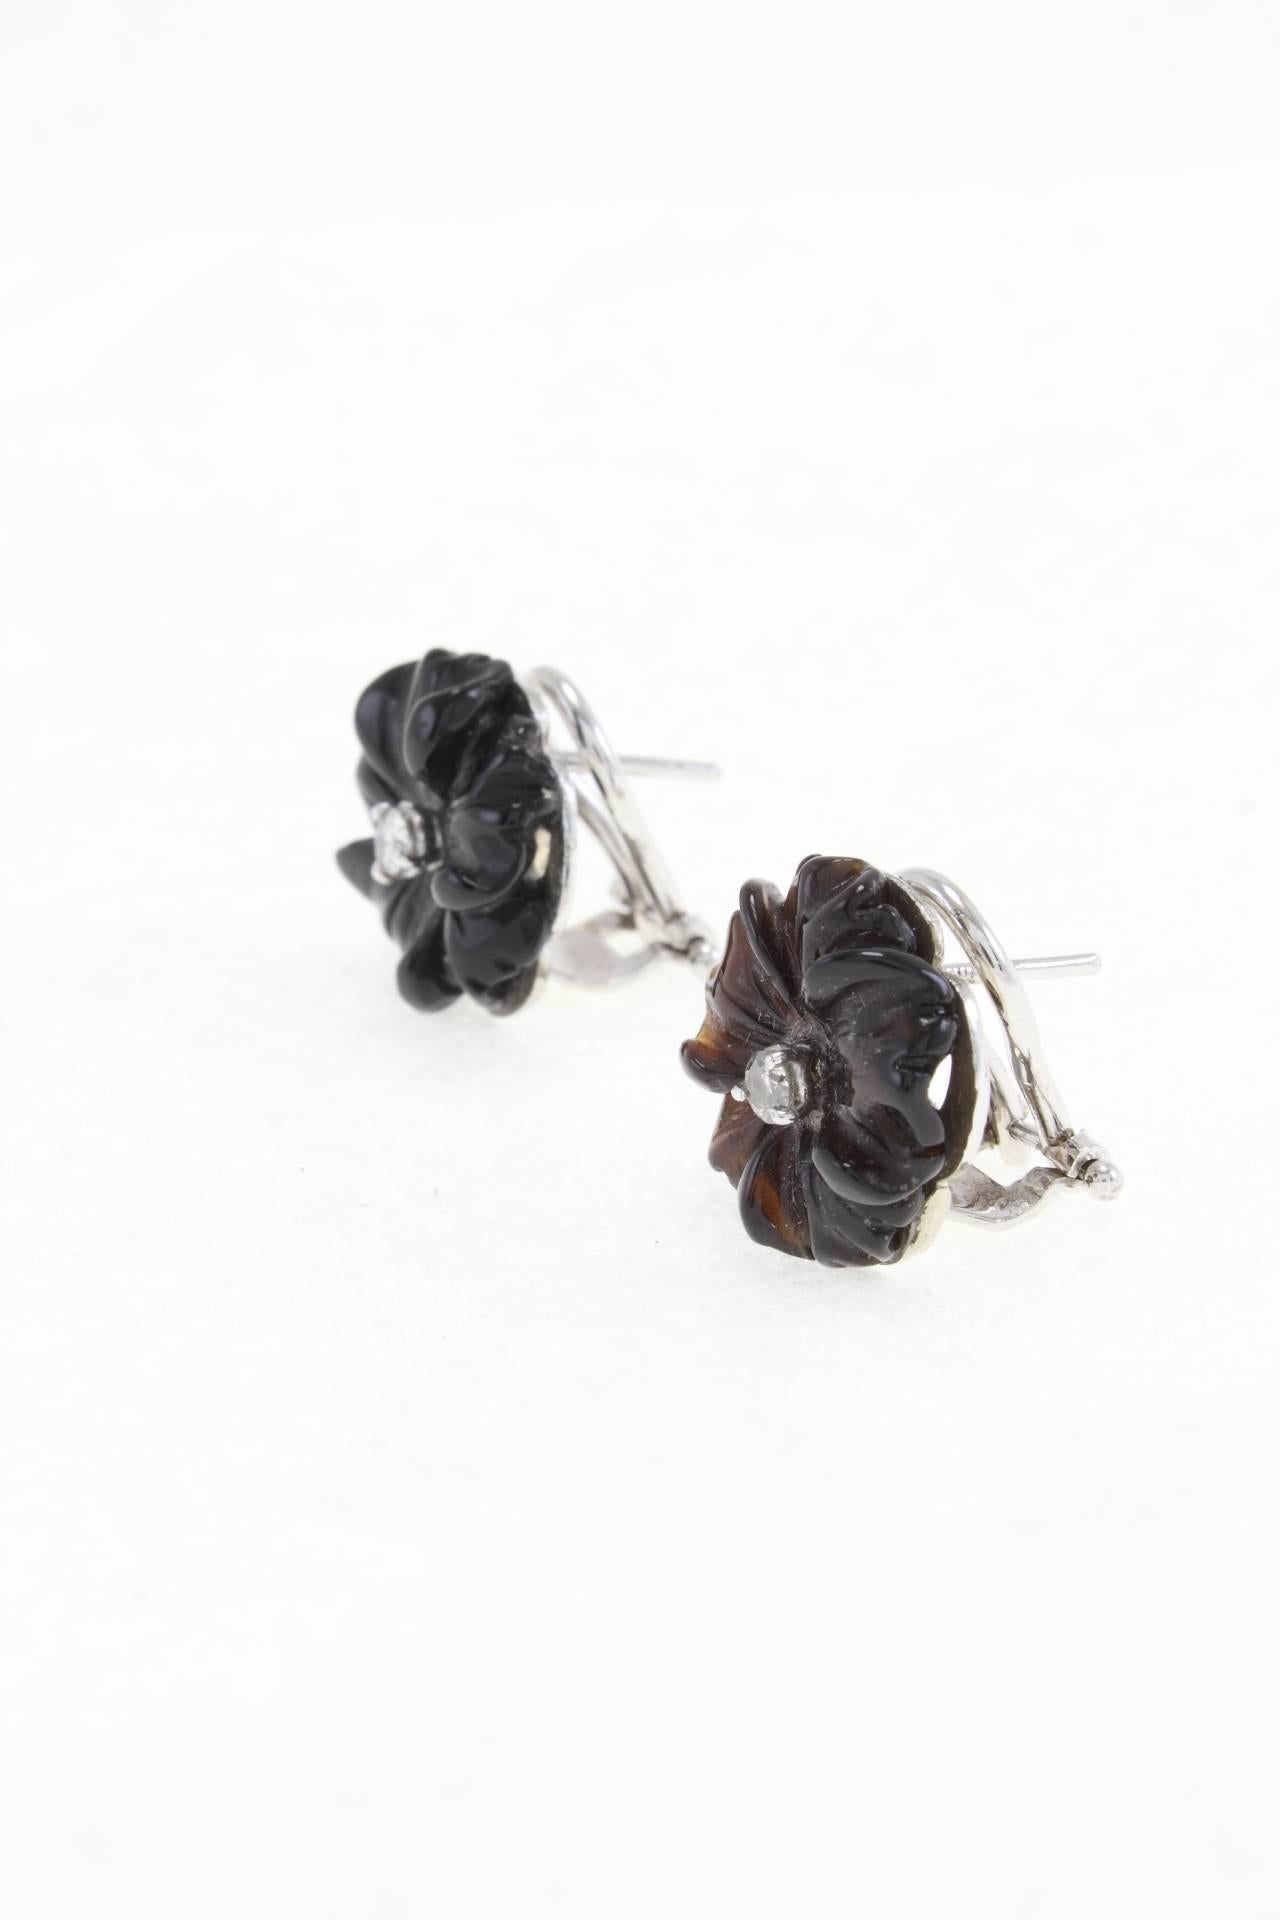 Black earrings in 14Kt white gold composed of a flower shaped black agate with a central diamond. 

agate (2.10gr)
diamond(0.13Kt)
Rf. 17924
US Size
Width 0.59 inch
Length 0.59 inch